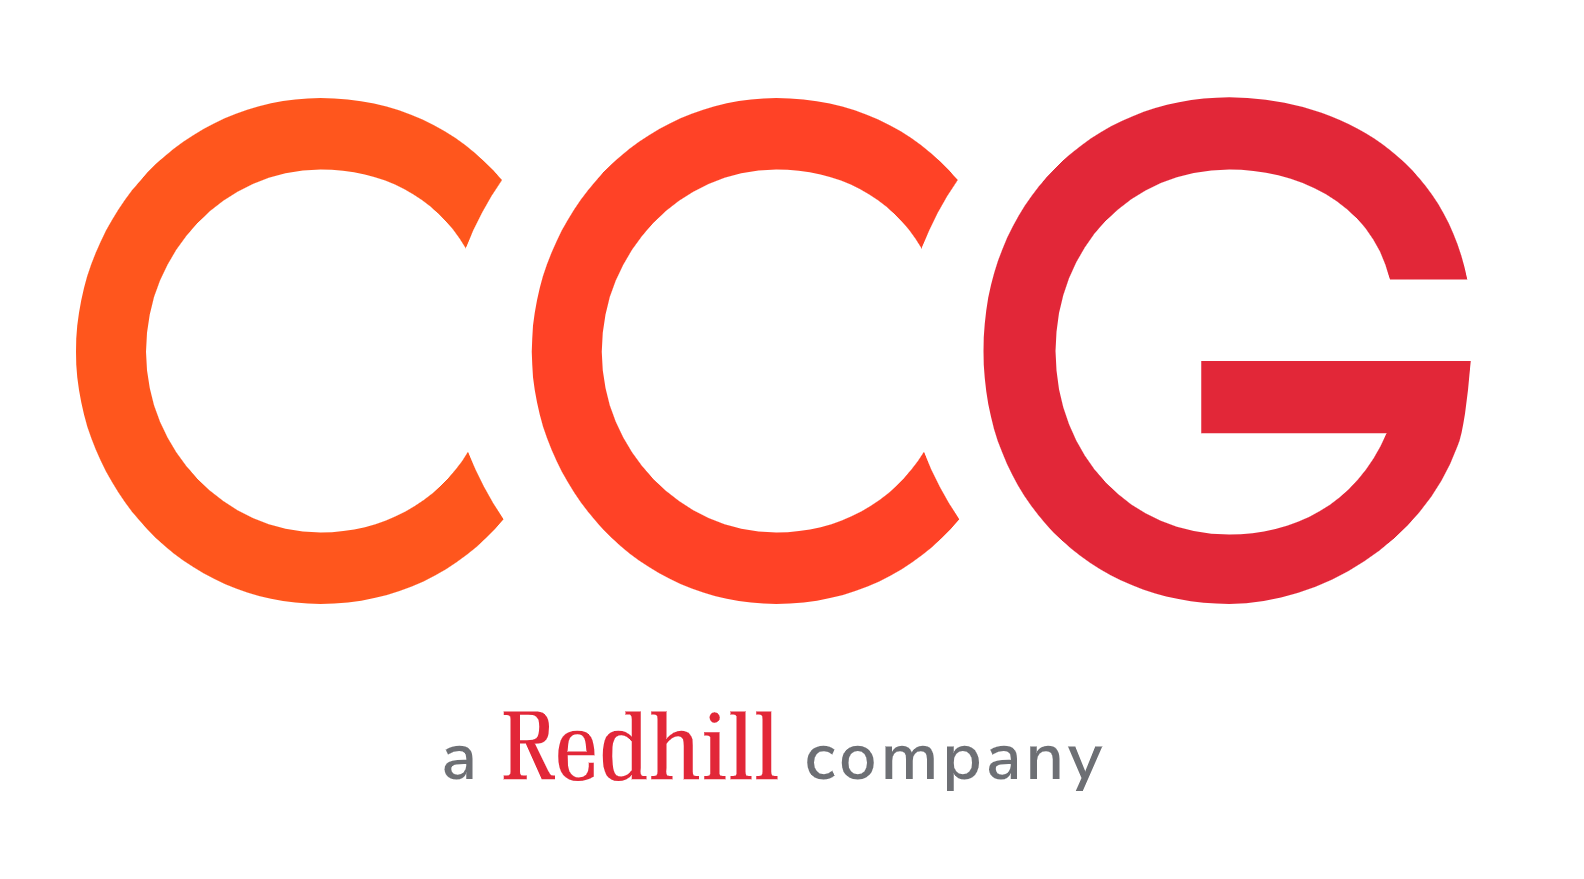 Creative Consulting Group